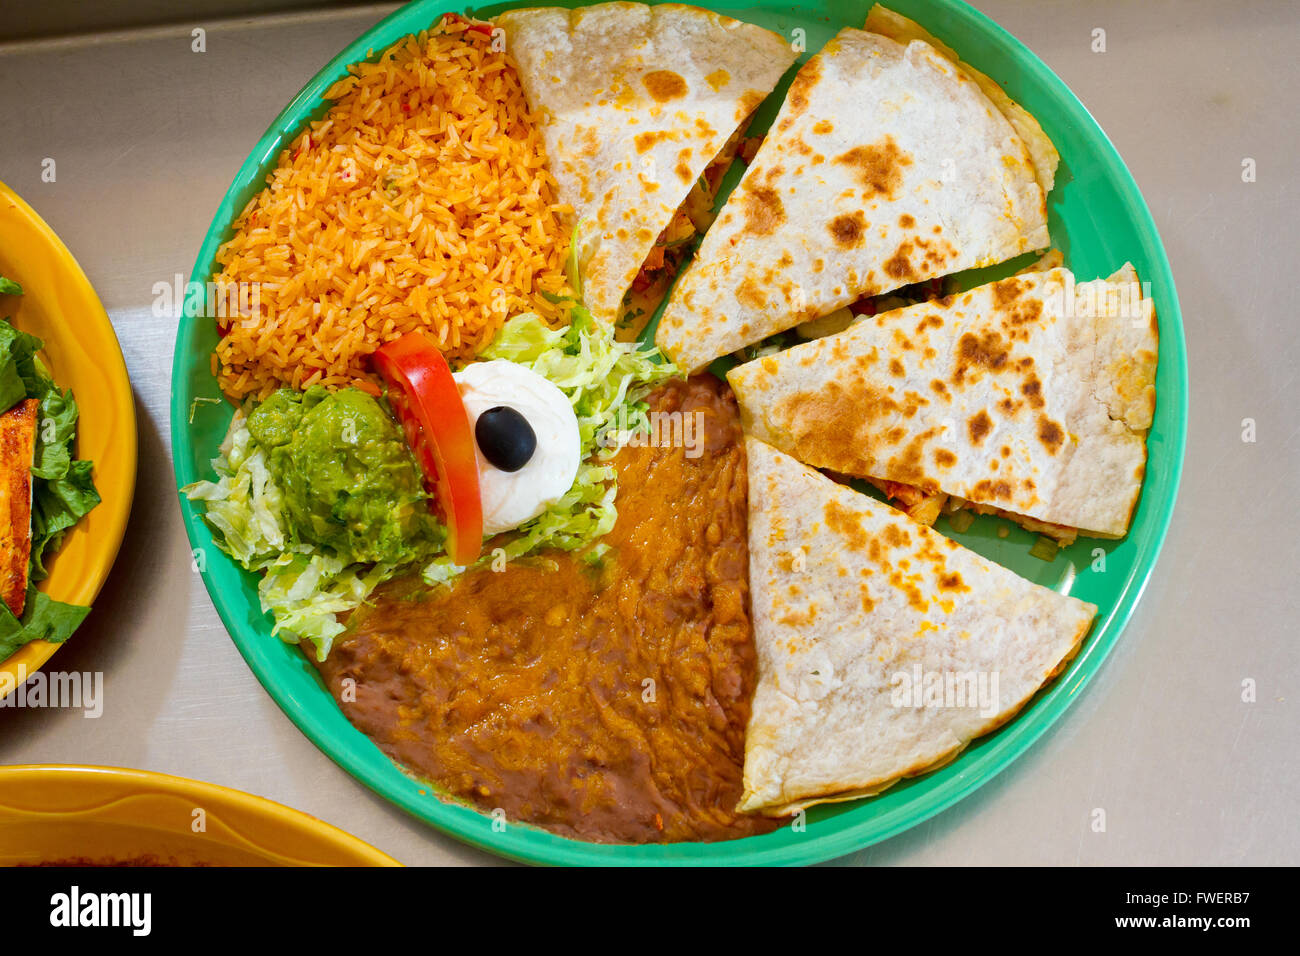 An authentic quesadilla at Mexican restaurant with rice and beans. Stock Photo